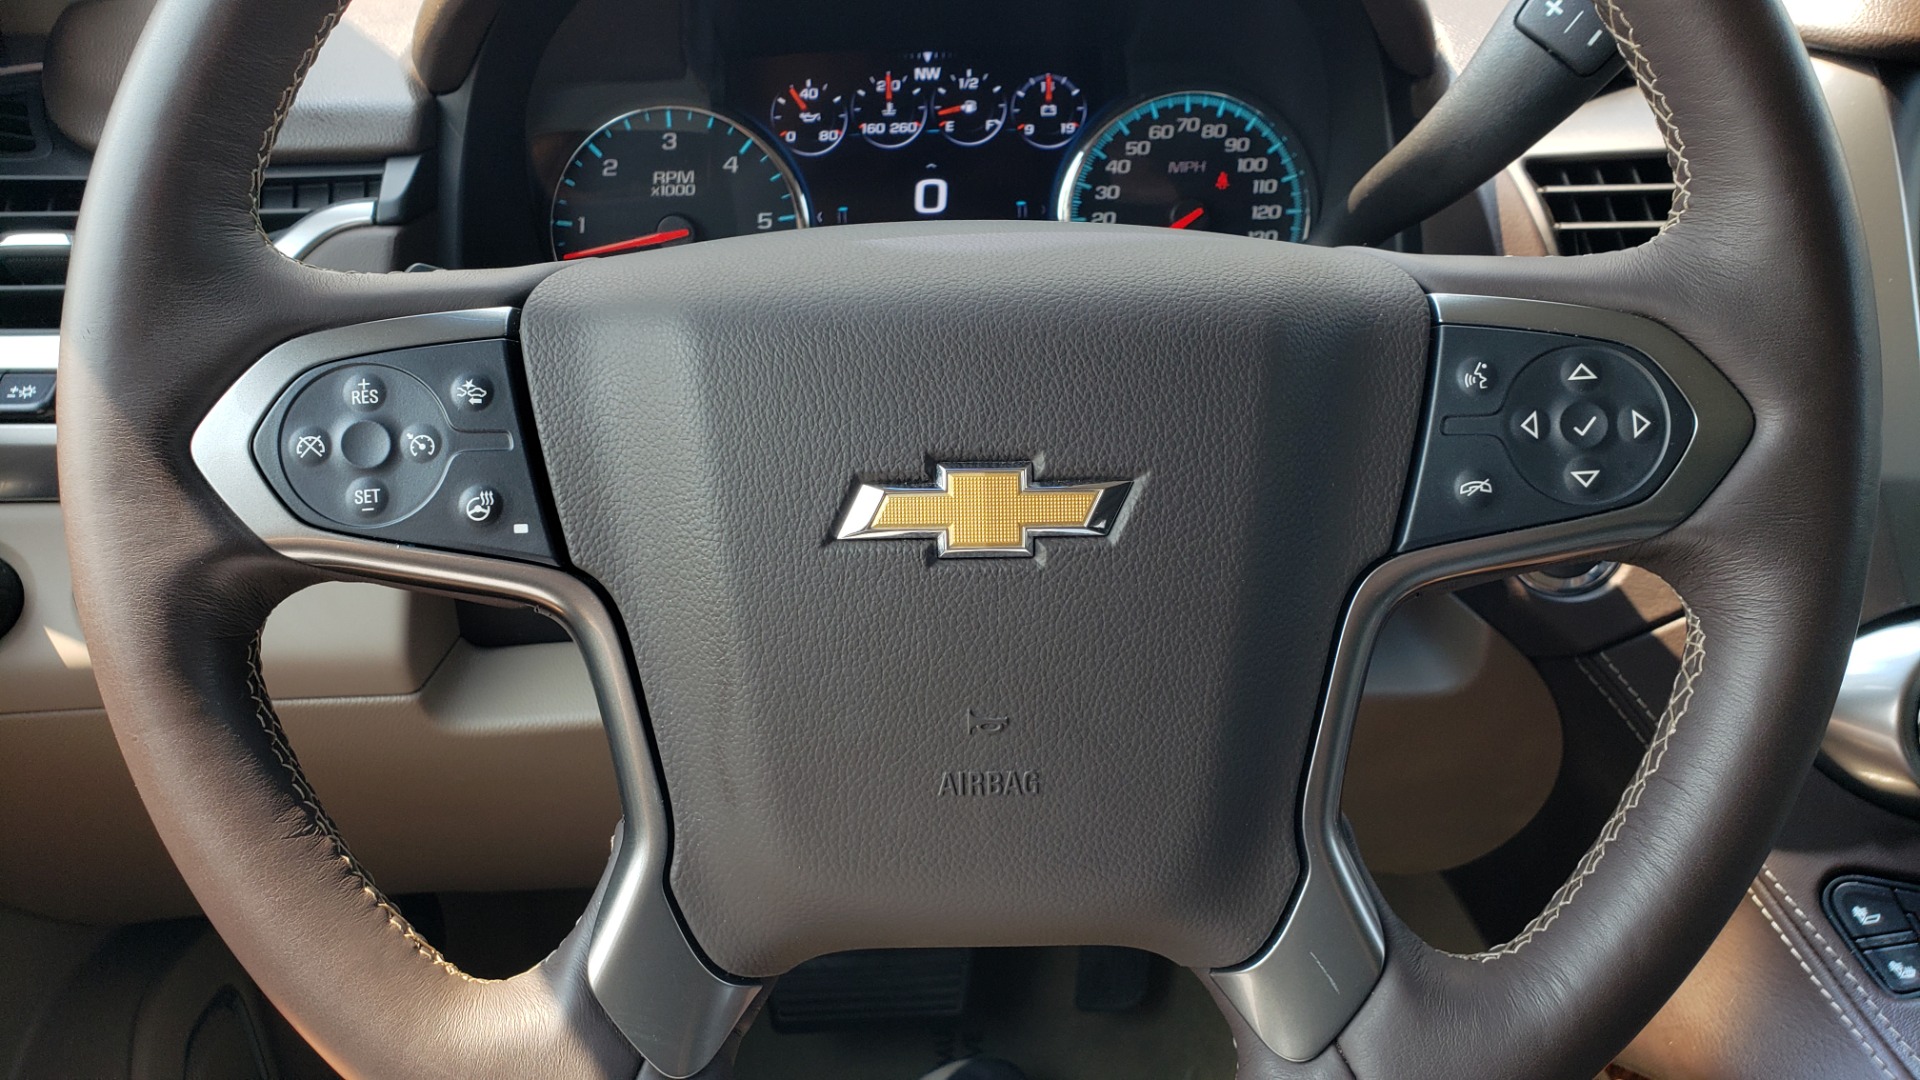 Used 2018 Chevrolet TAHOE PREMIER 4WD / NAV / SUNROOF / BOSE / 3-ROW / HUD / REARVIEW for sale Sold at Formula Imports in Charlotte NC 28227 42